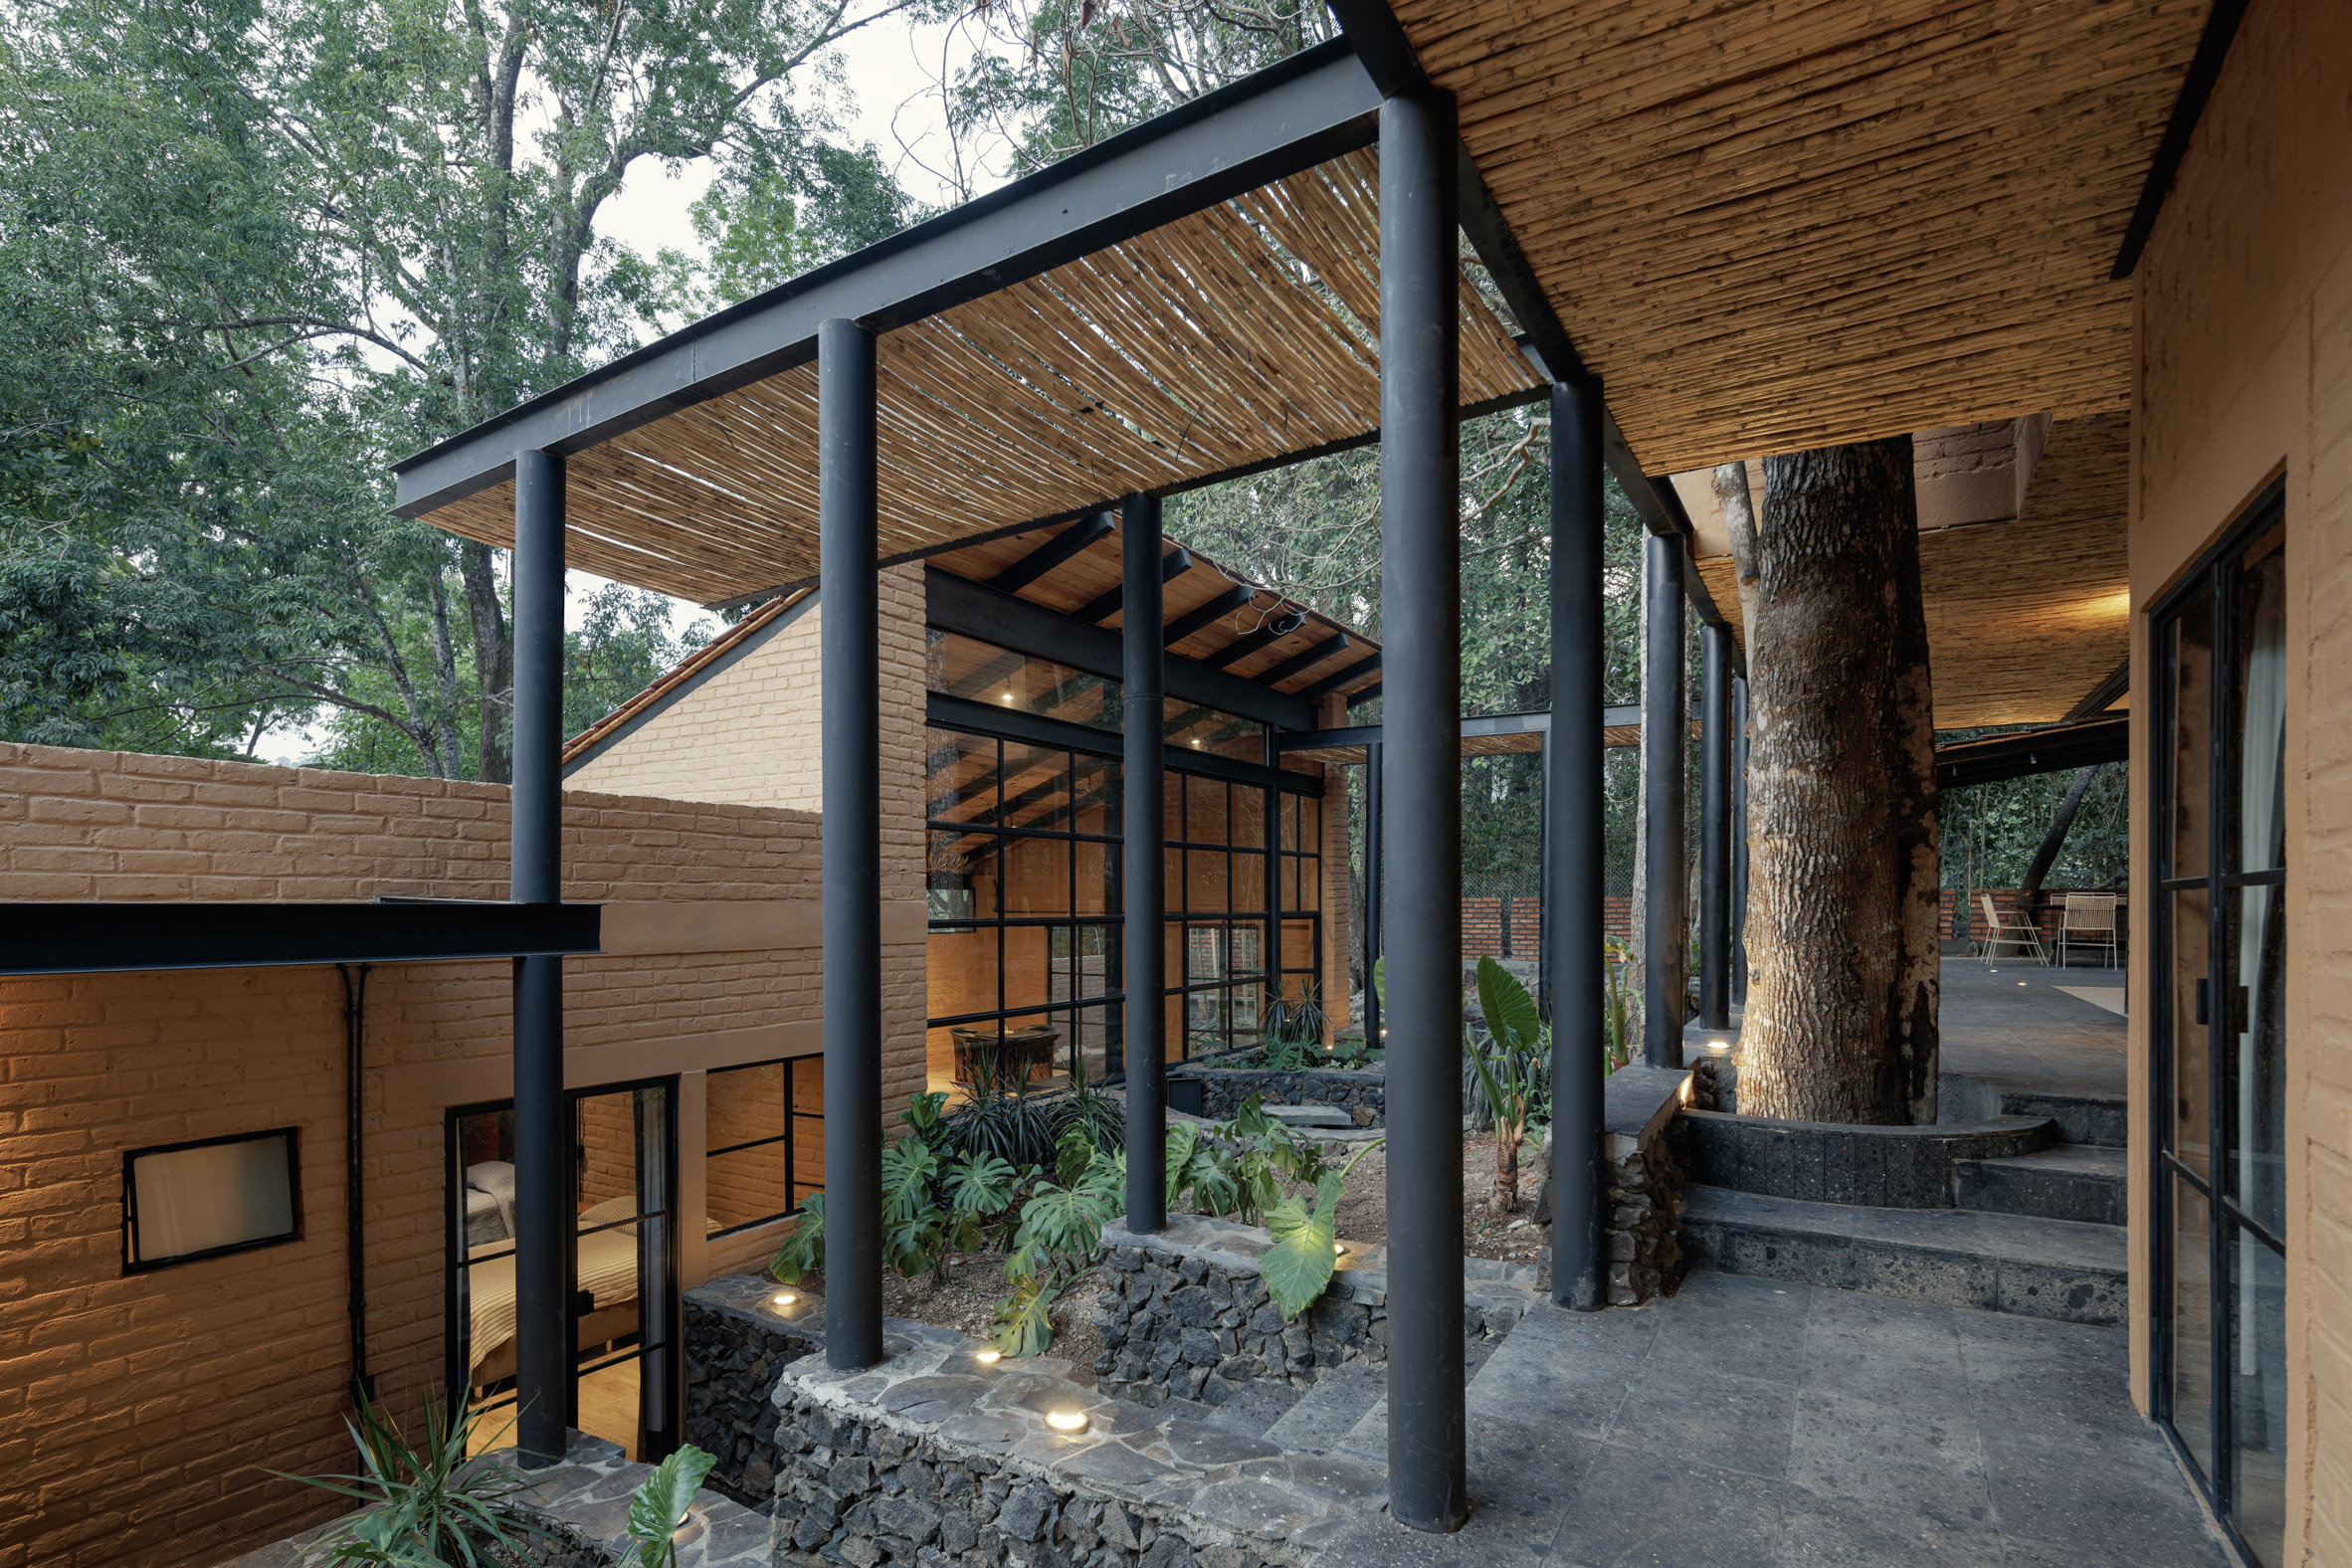 Terraced courtyard in Mexico forest home supported by black poles